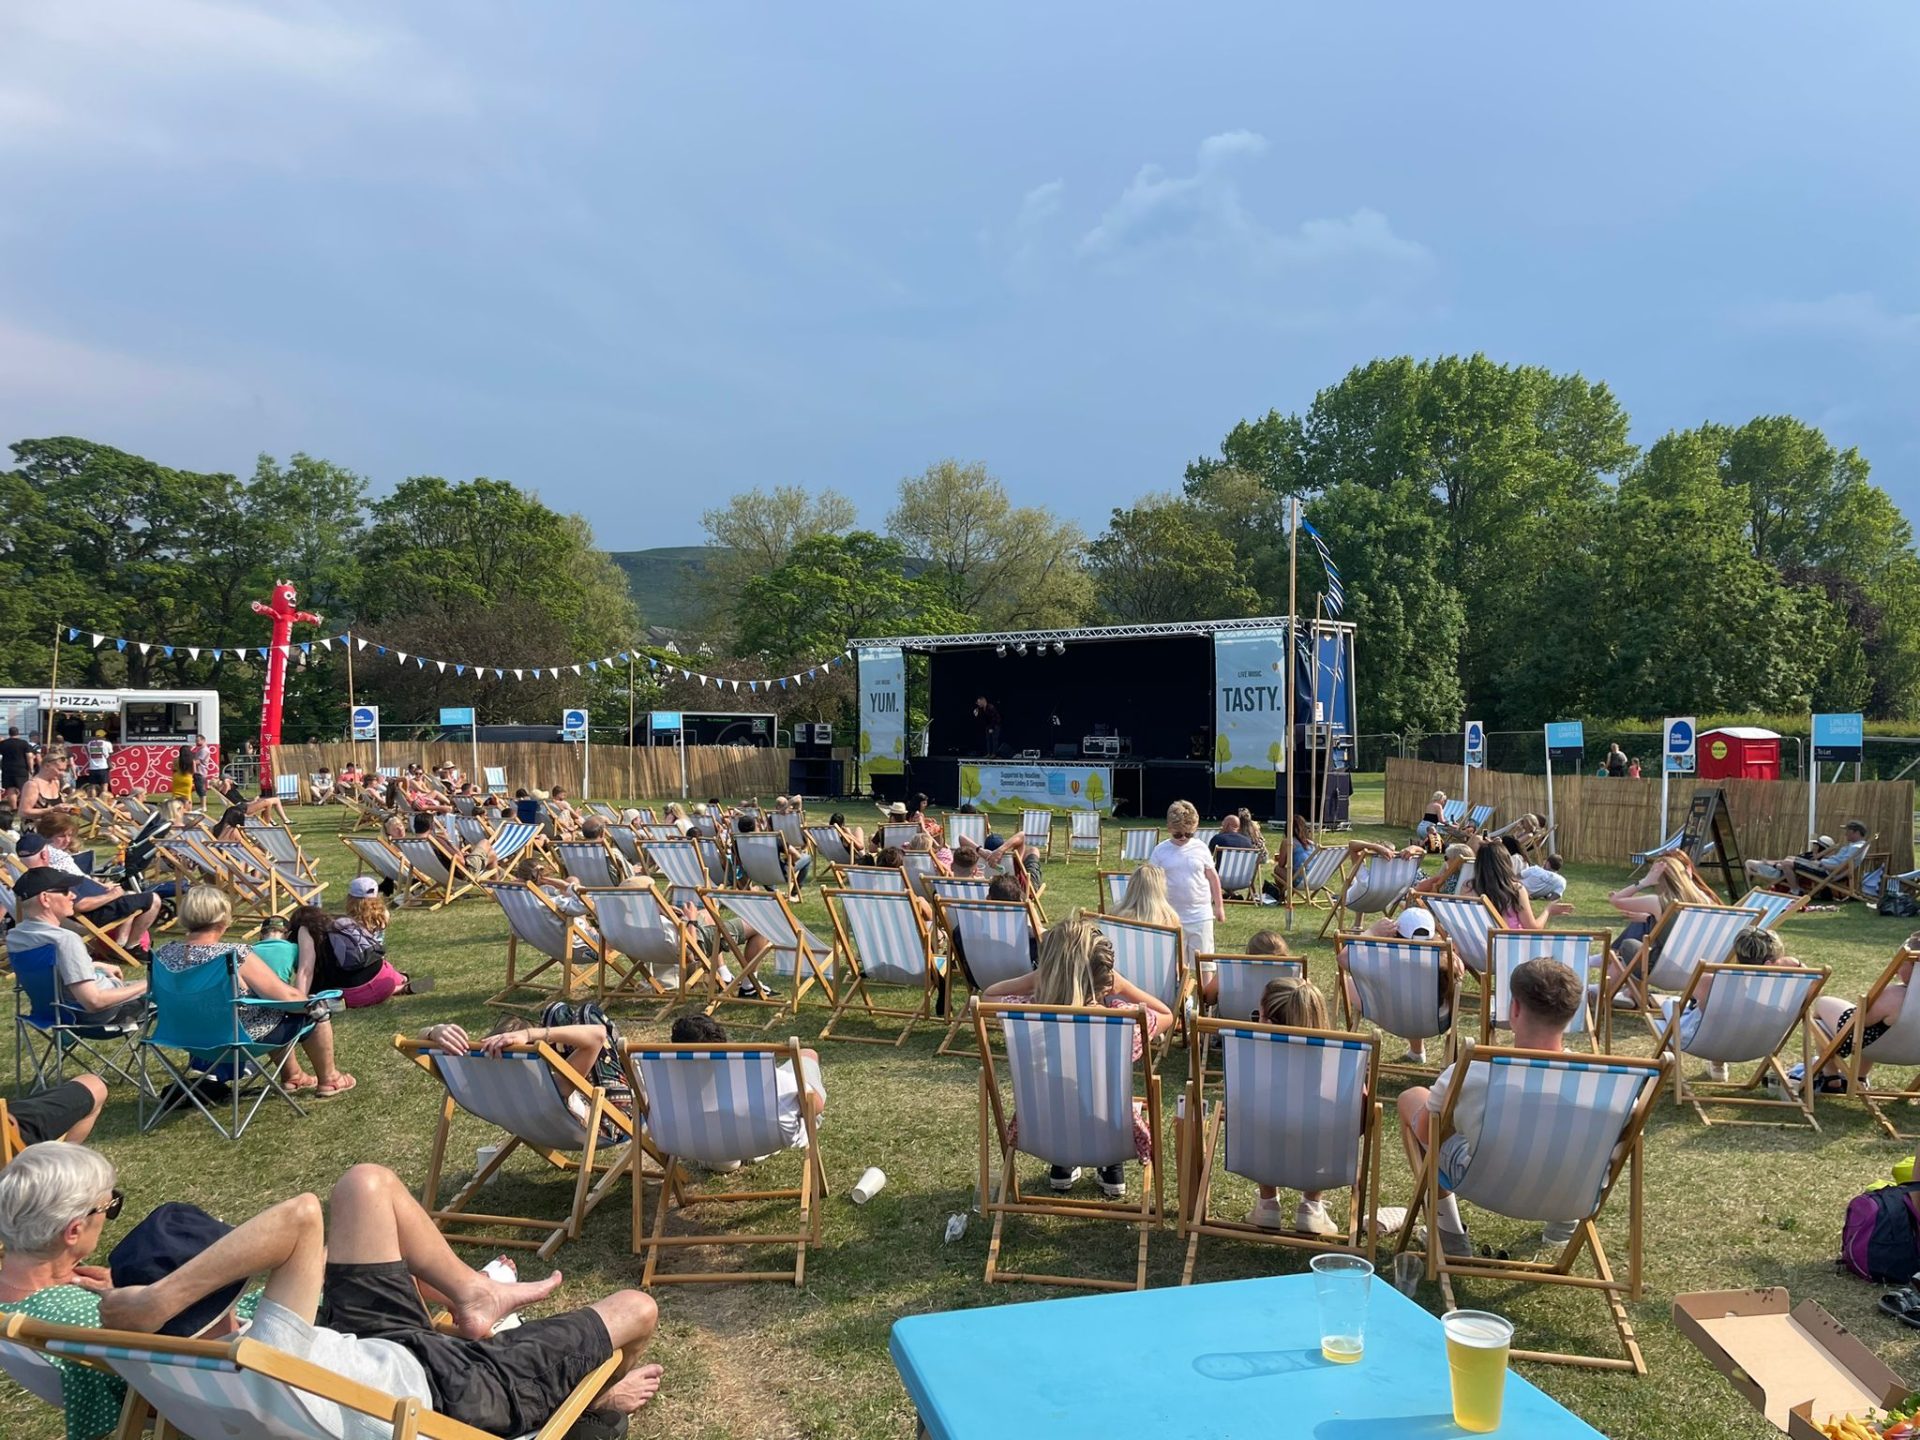 People sitting in deck chairs facing a stage